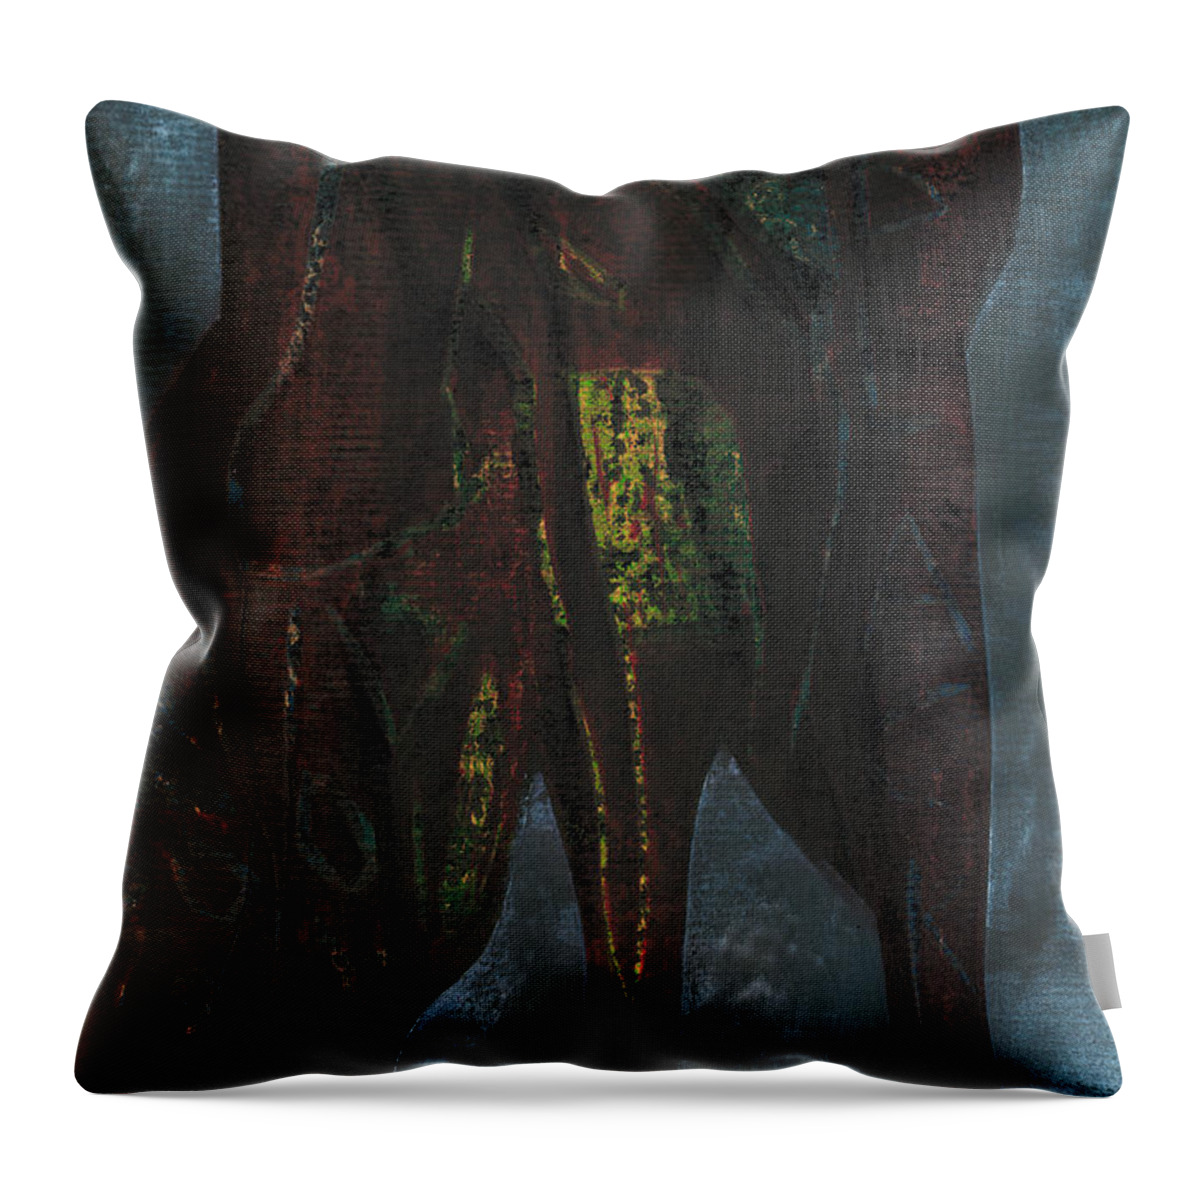 Elephant Throw Pillow featuring the relief Circus Elephant 4 by Edgeworth Johnstone